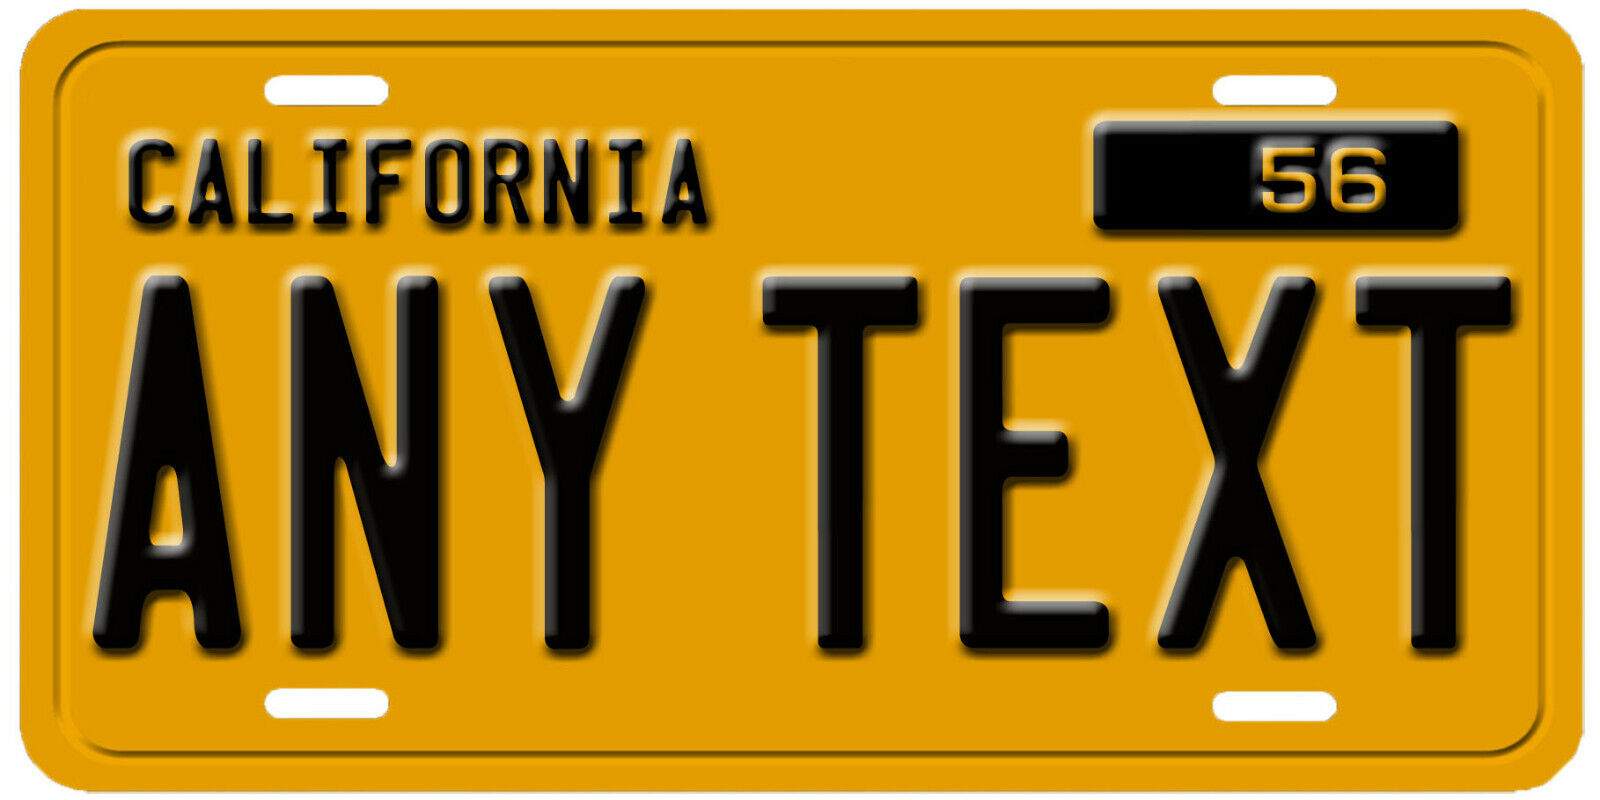 California Yellow Personalized License Plate ANY TEXT YOUR TEXT Custom CA 1950s